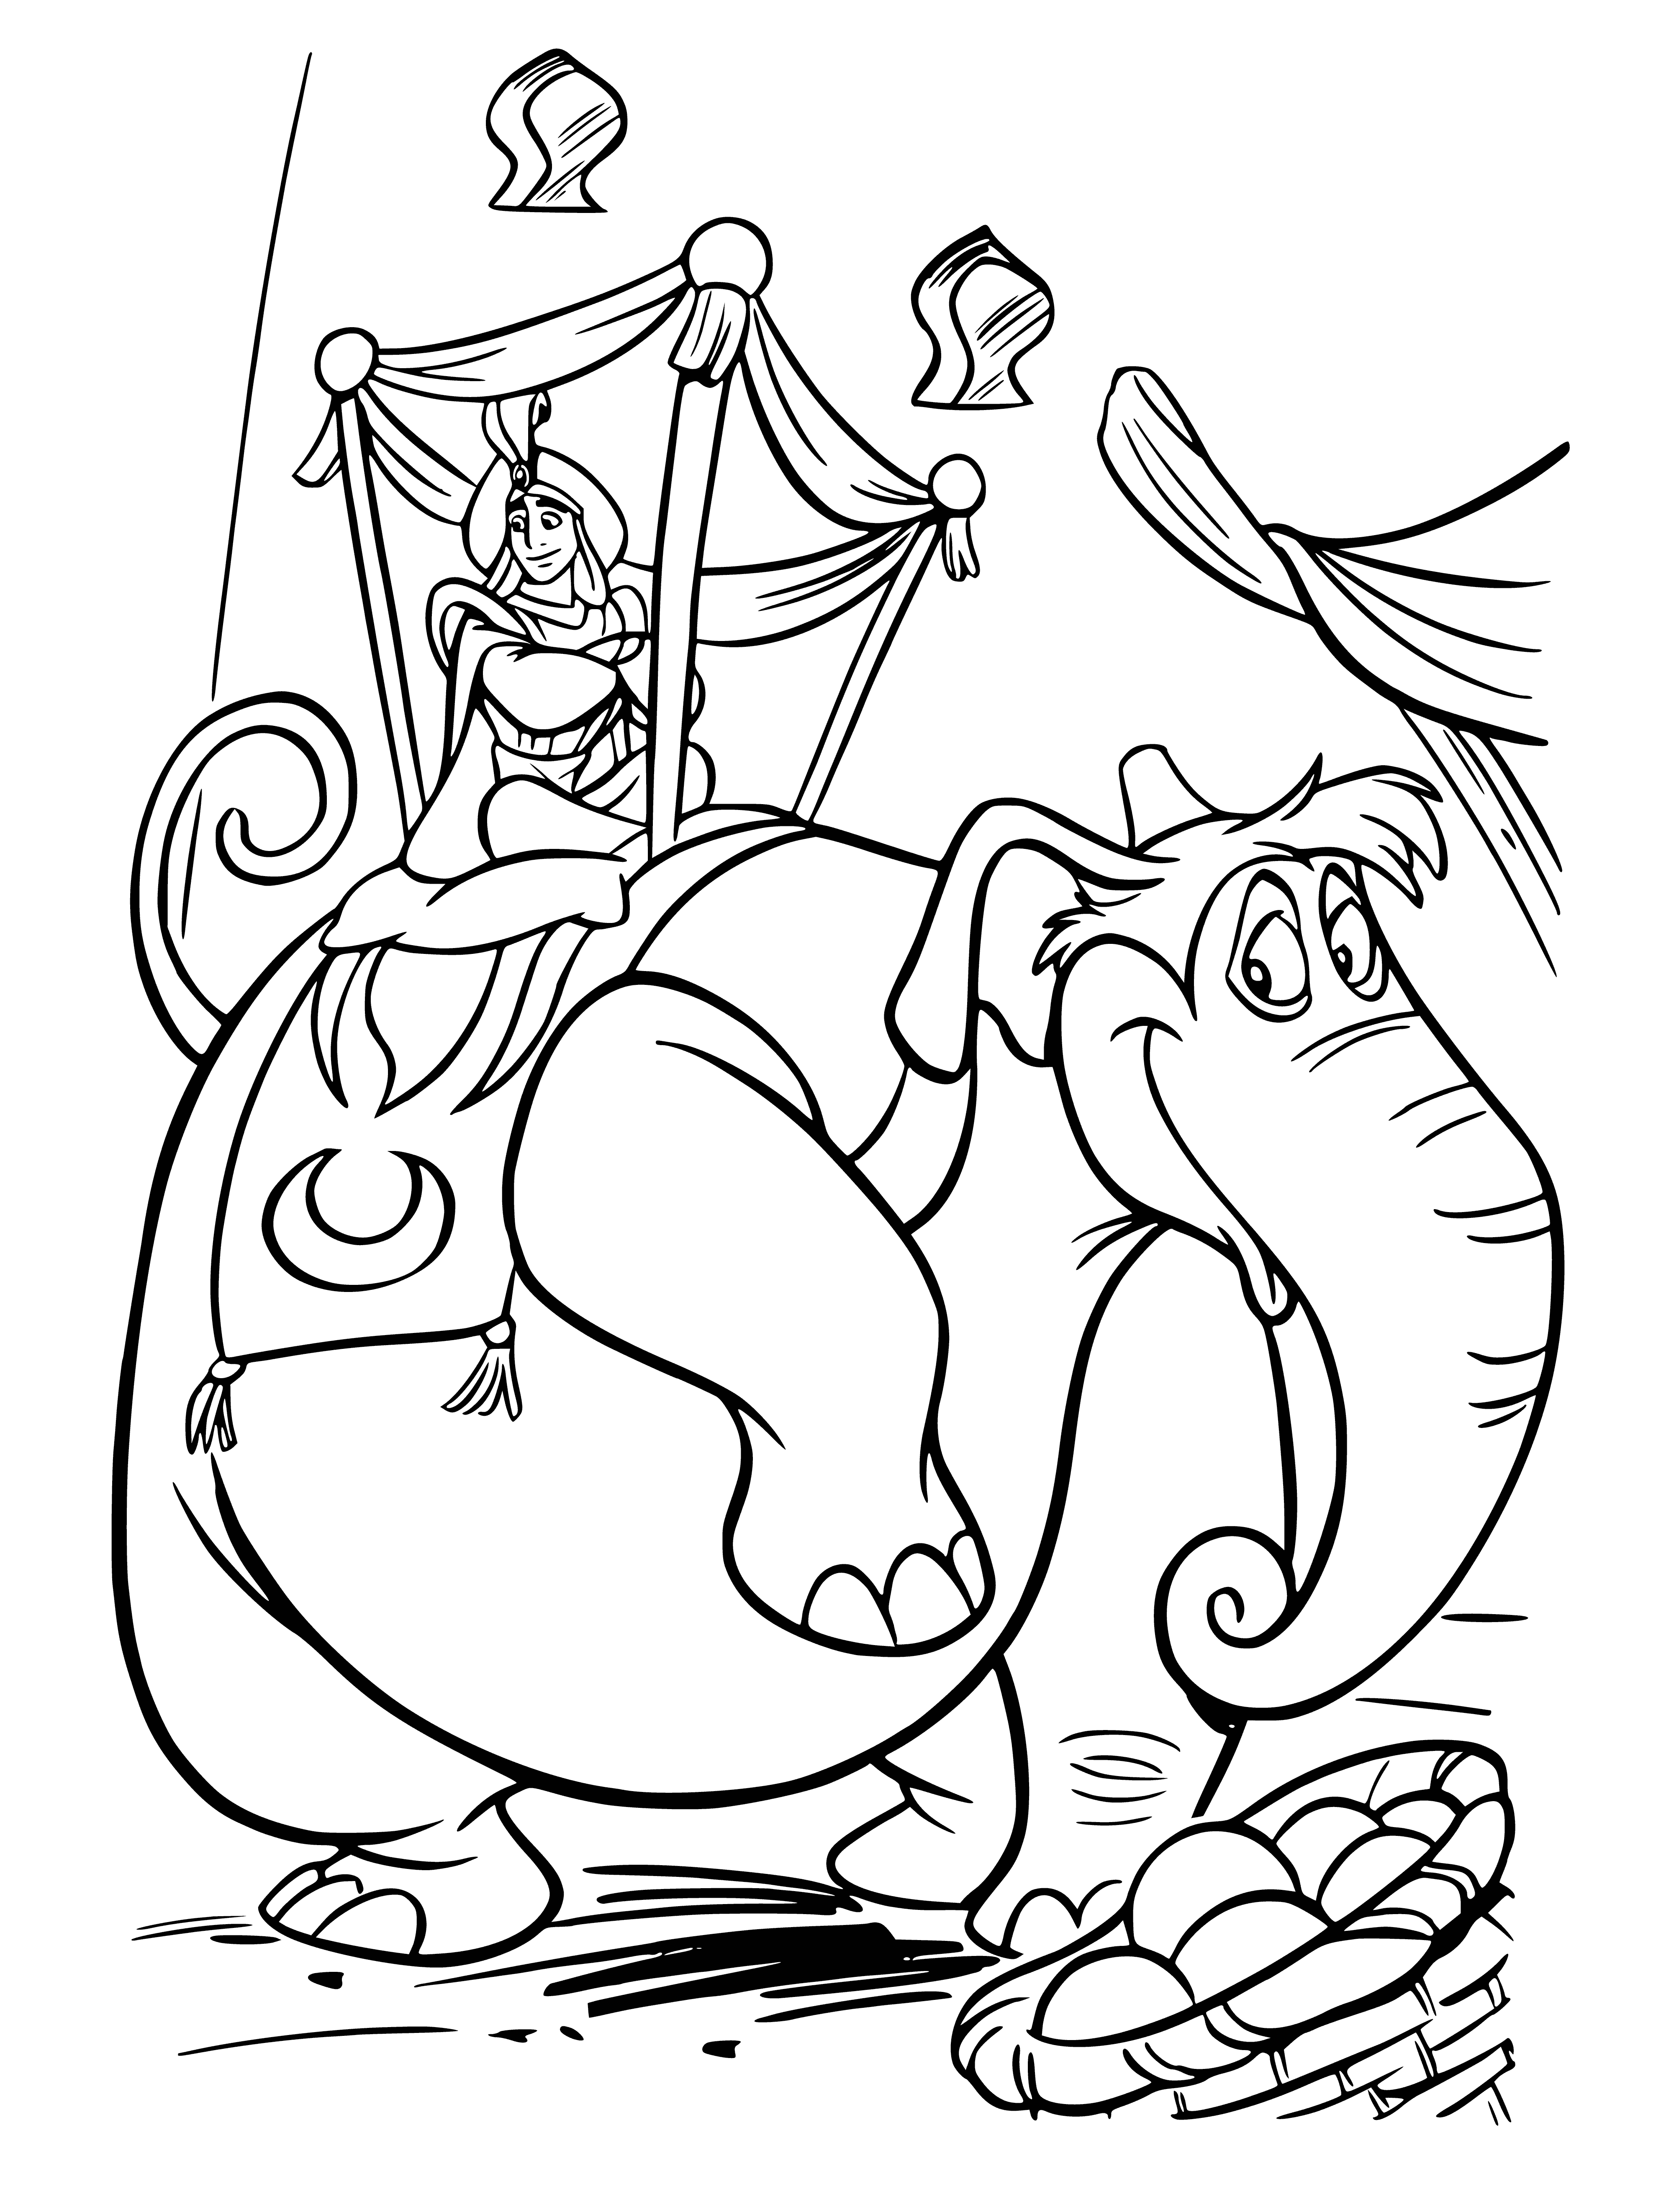 coloring page: Aladdin stands in a city of cheering people, holding a sword and shield in each hand. In the background is a cityscape of towers and minarets. #Disney #Aladdin